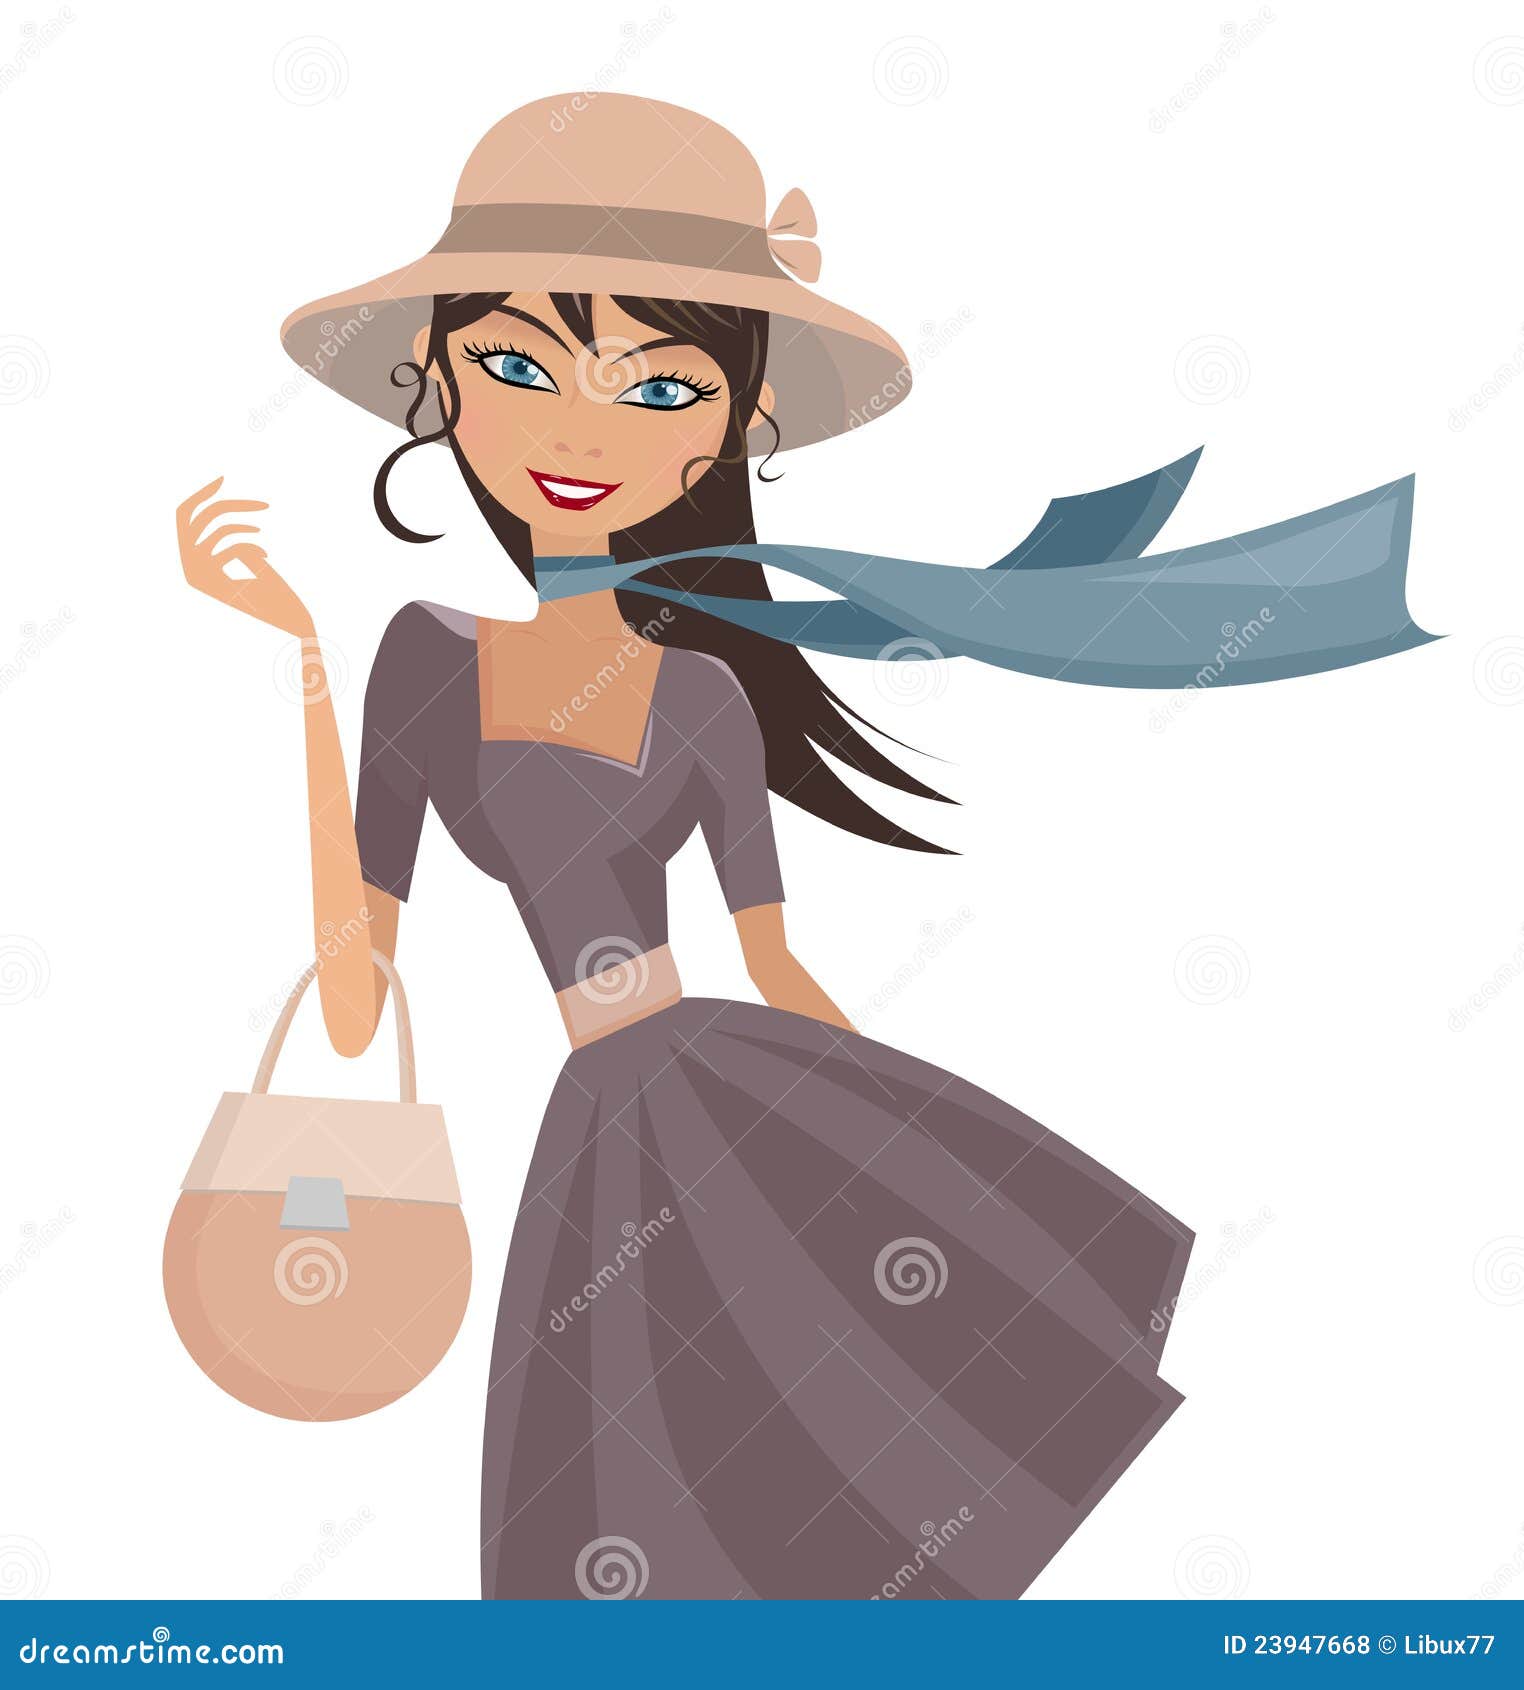 lady with hat clipart - photo #10